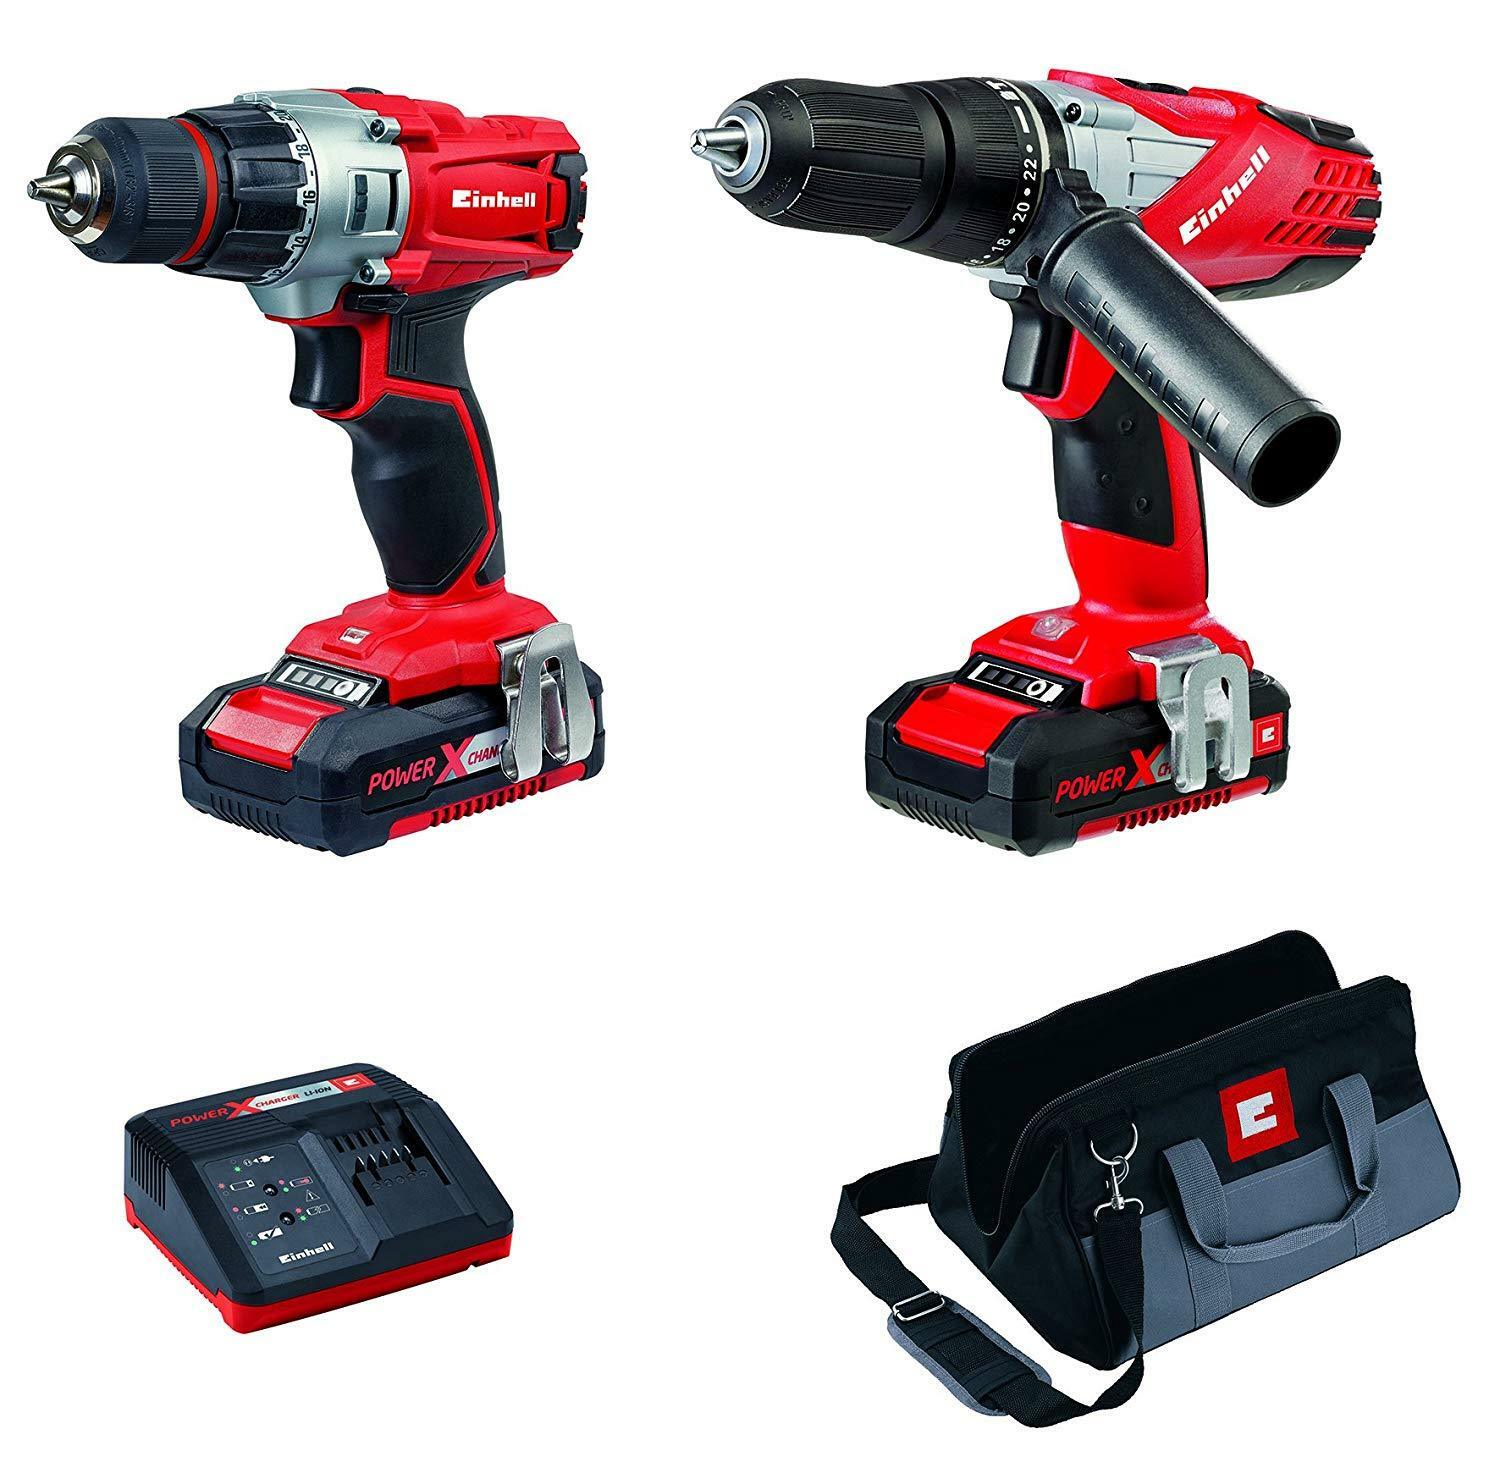 Einhell 4257200 Cordless Combi & Drill Driver Twin Pack